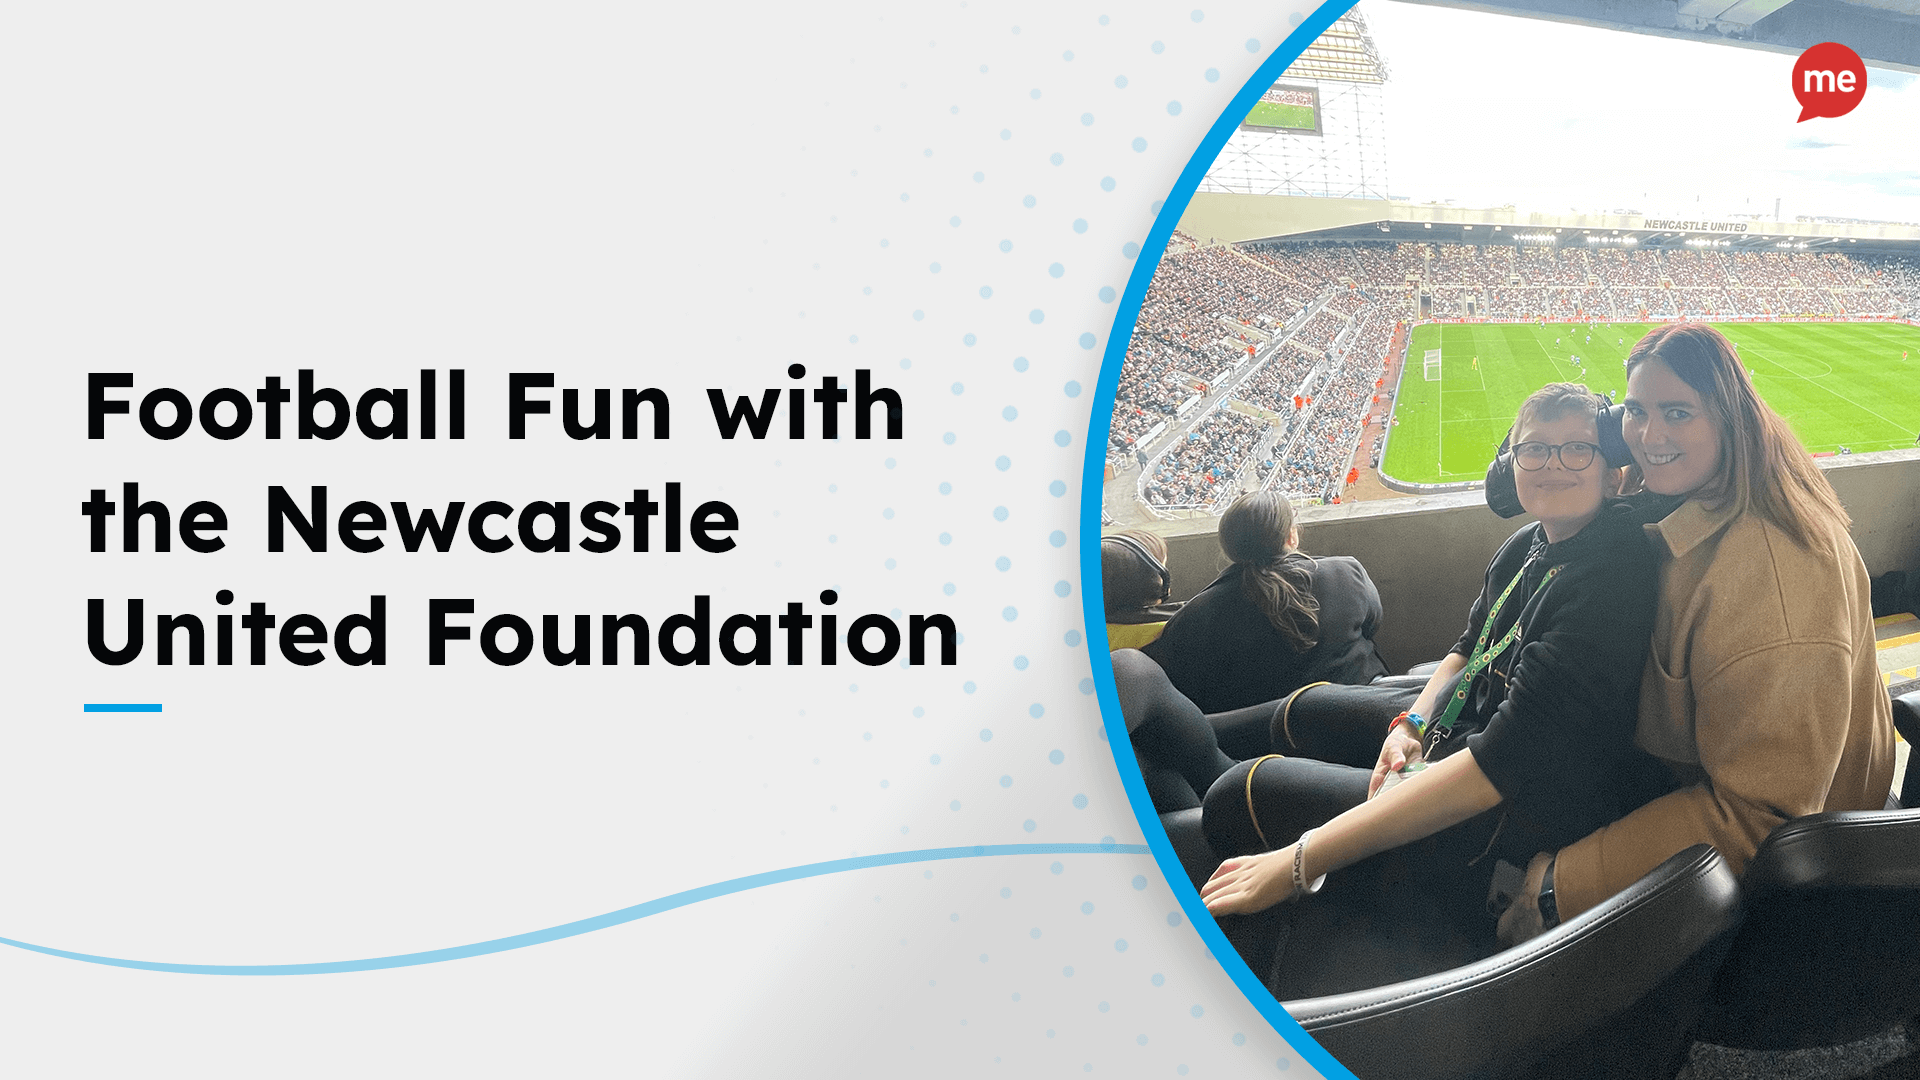 Football Fun with the Newcastle United Foundation